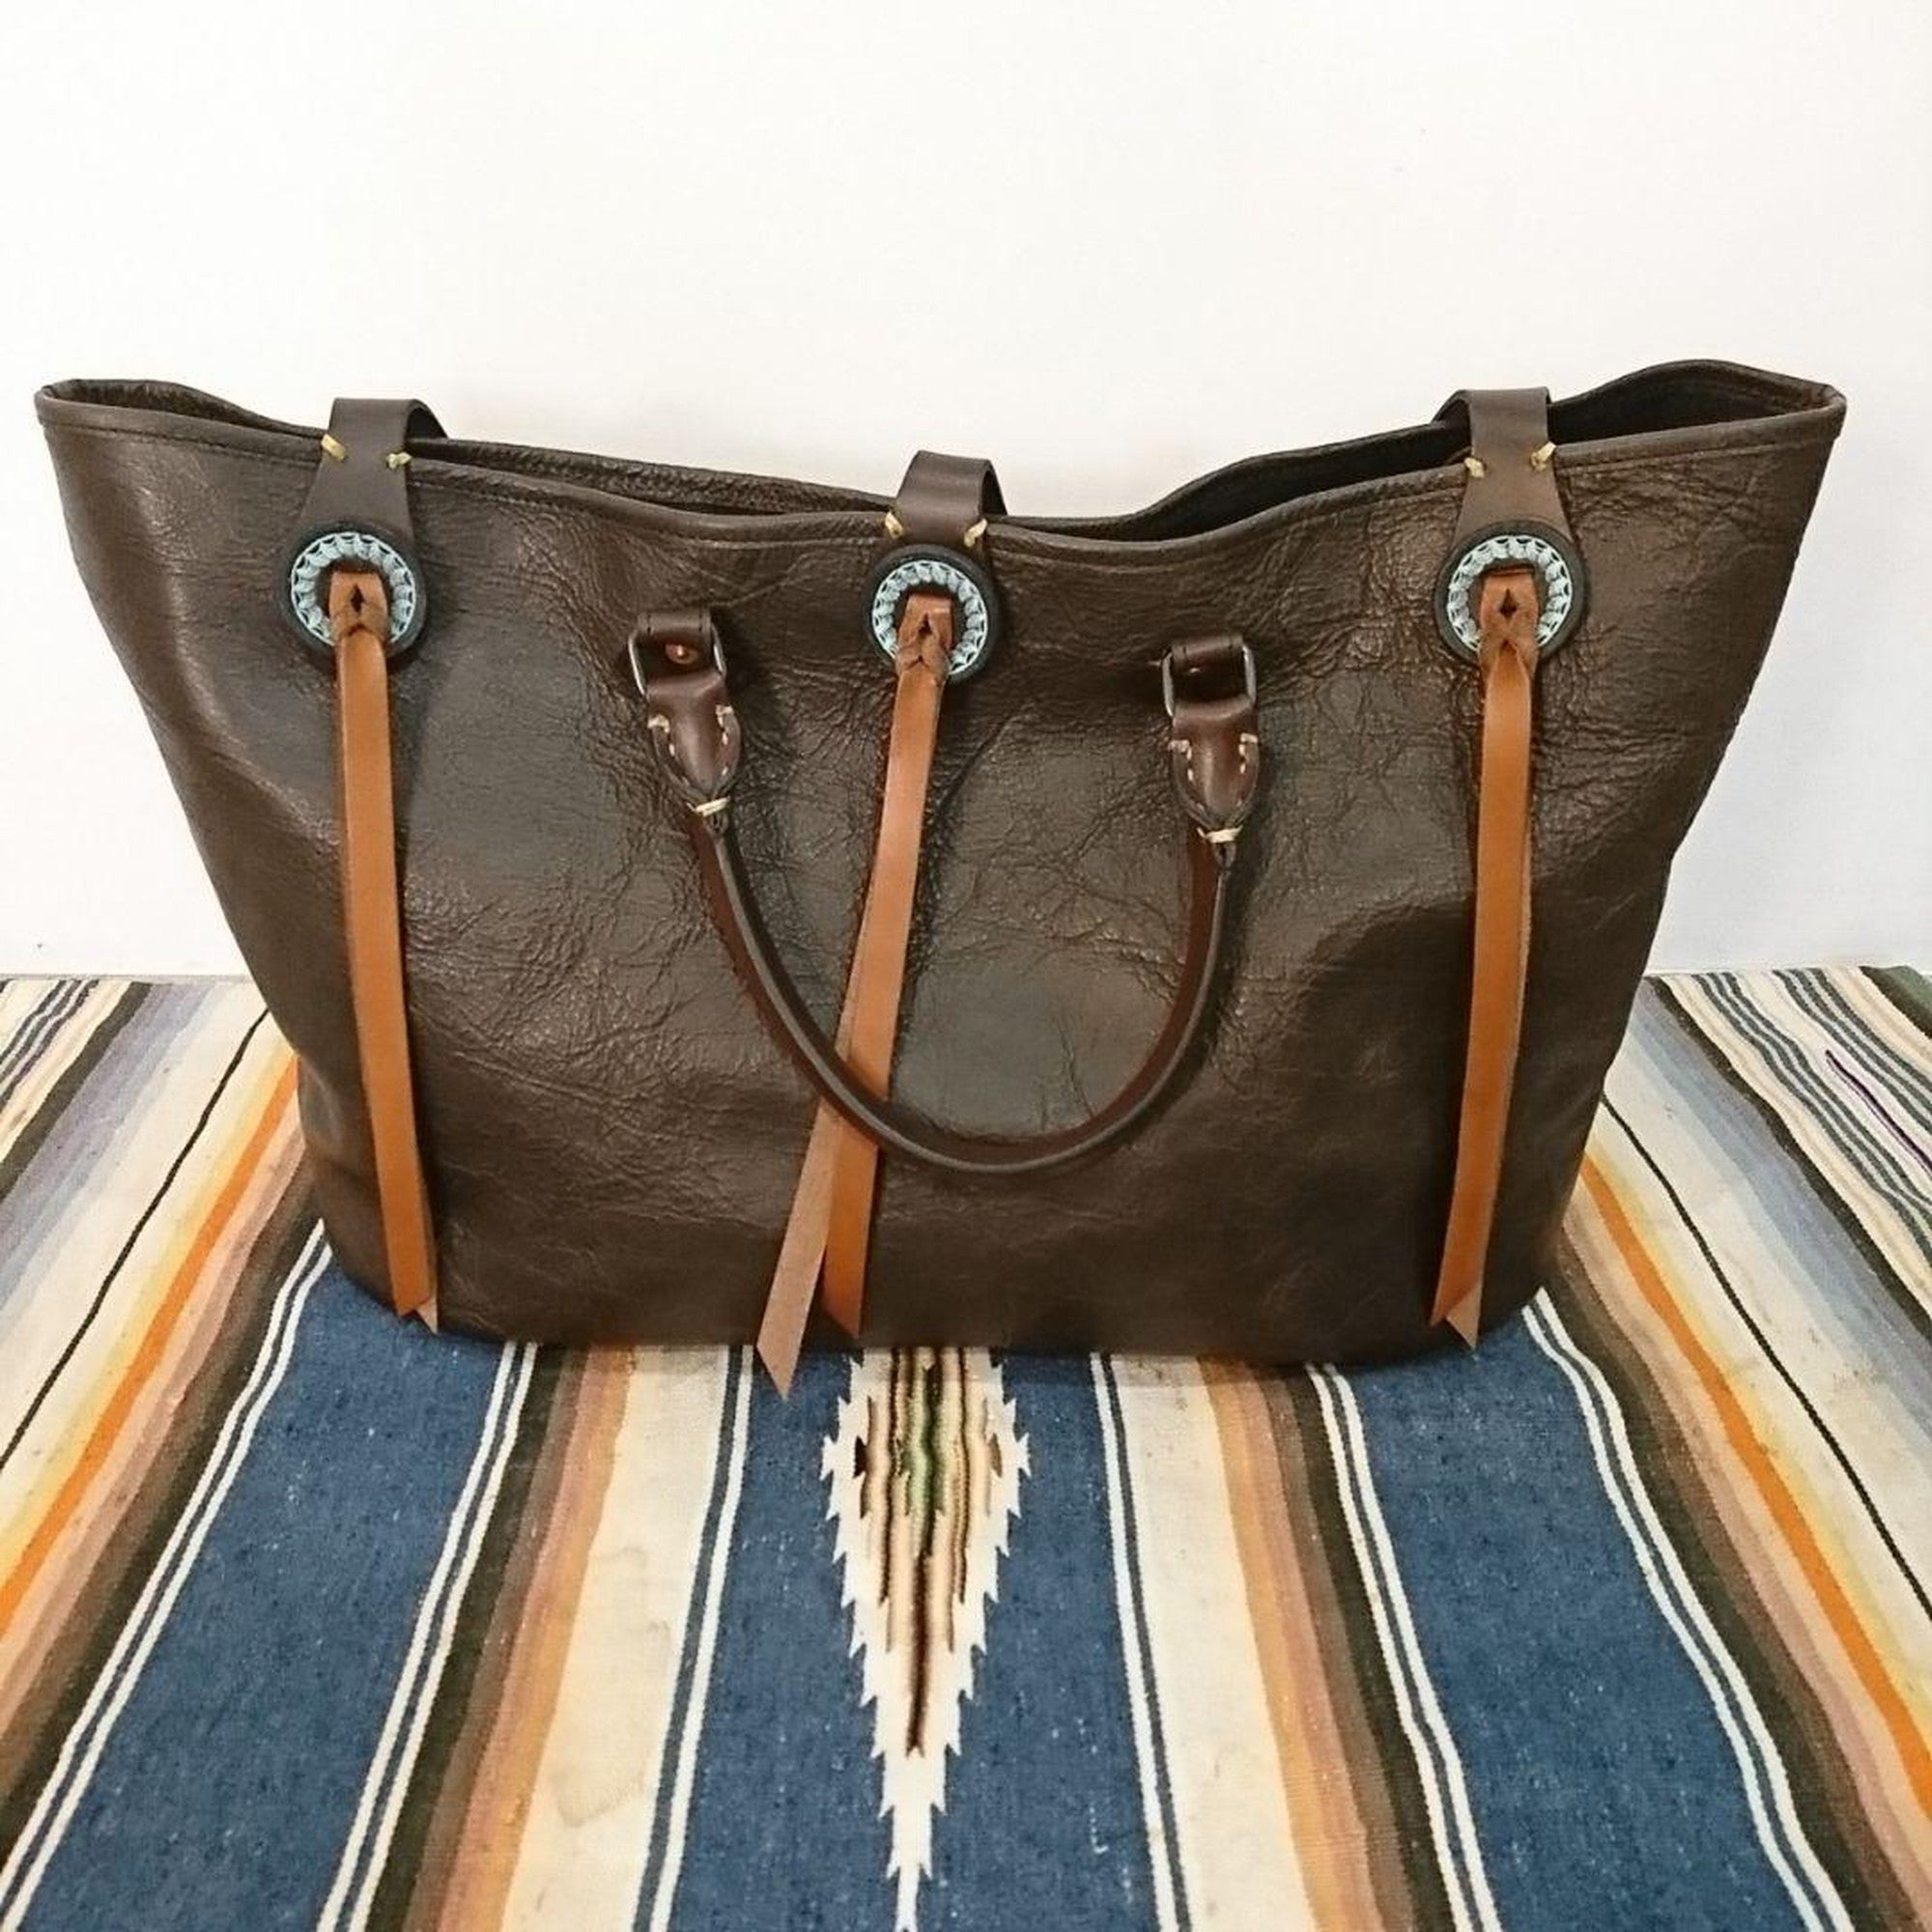 Handmade Old Leather Bag Made in Japan